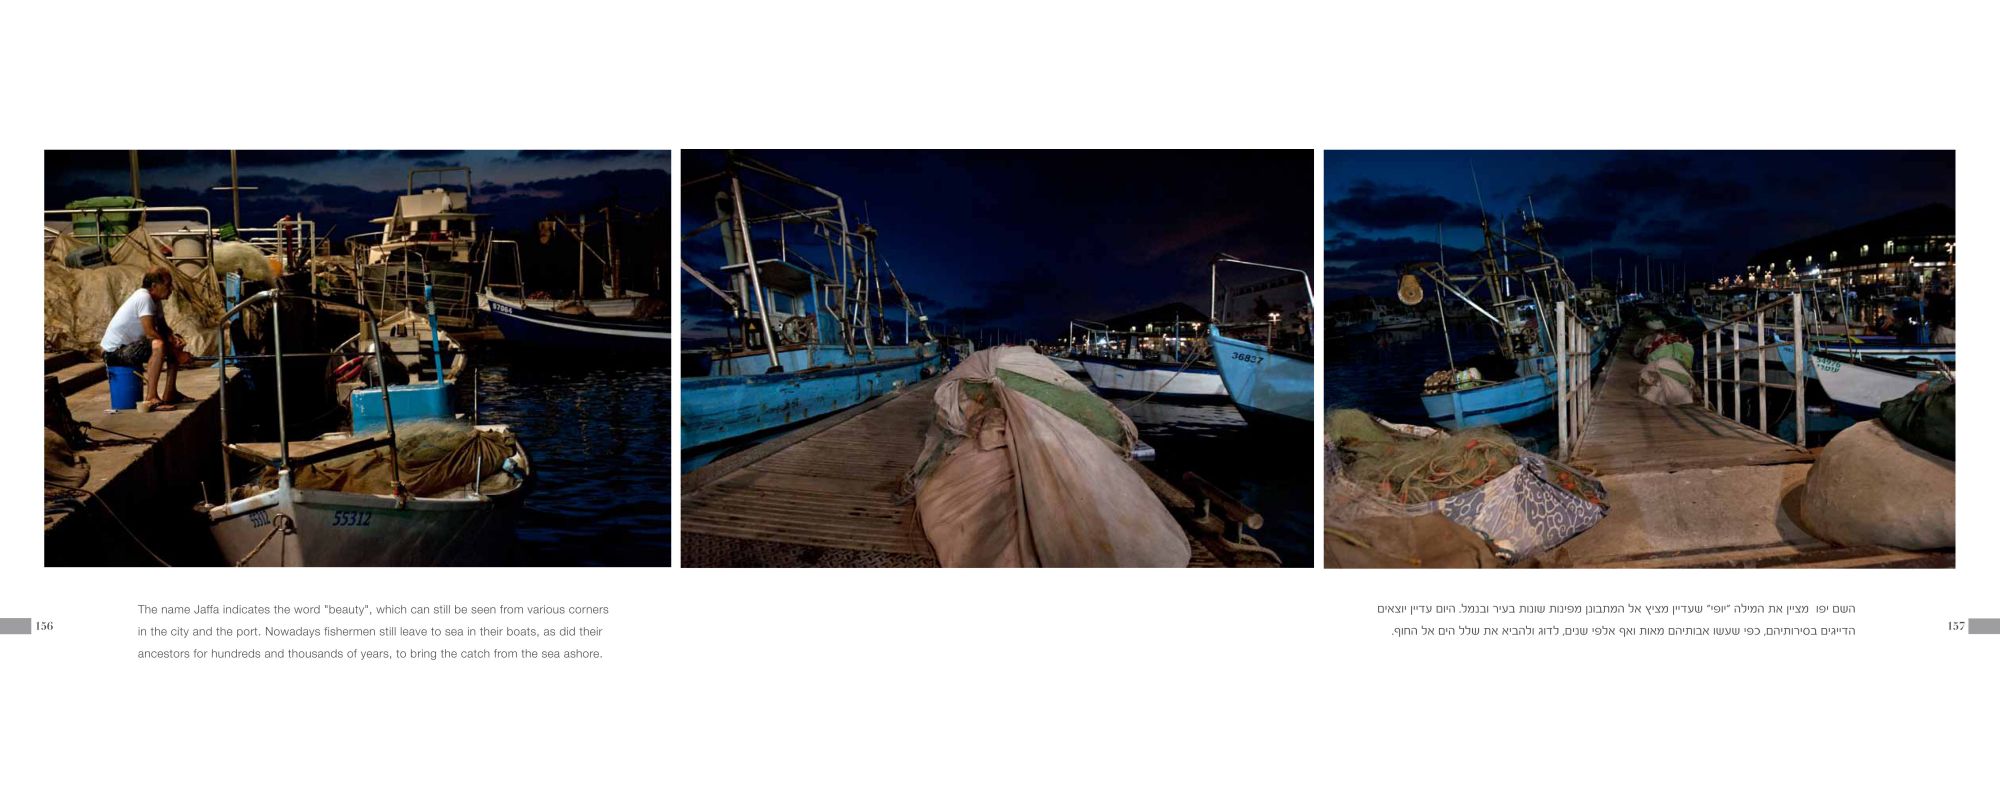 Page 156: Jaffa Harbour/Page 157: Jaffa Harbour by Night